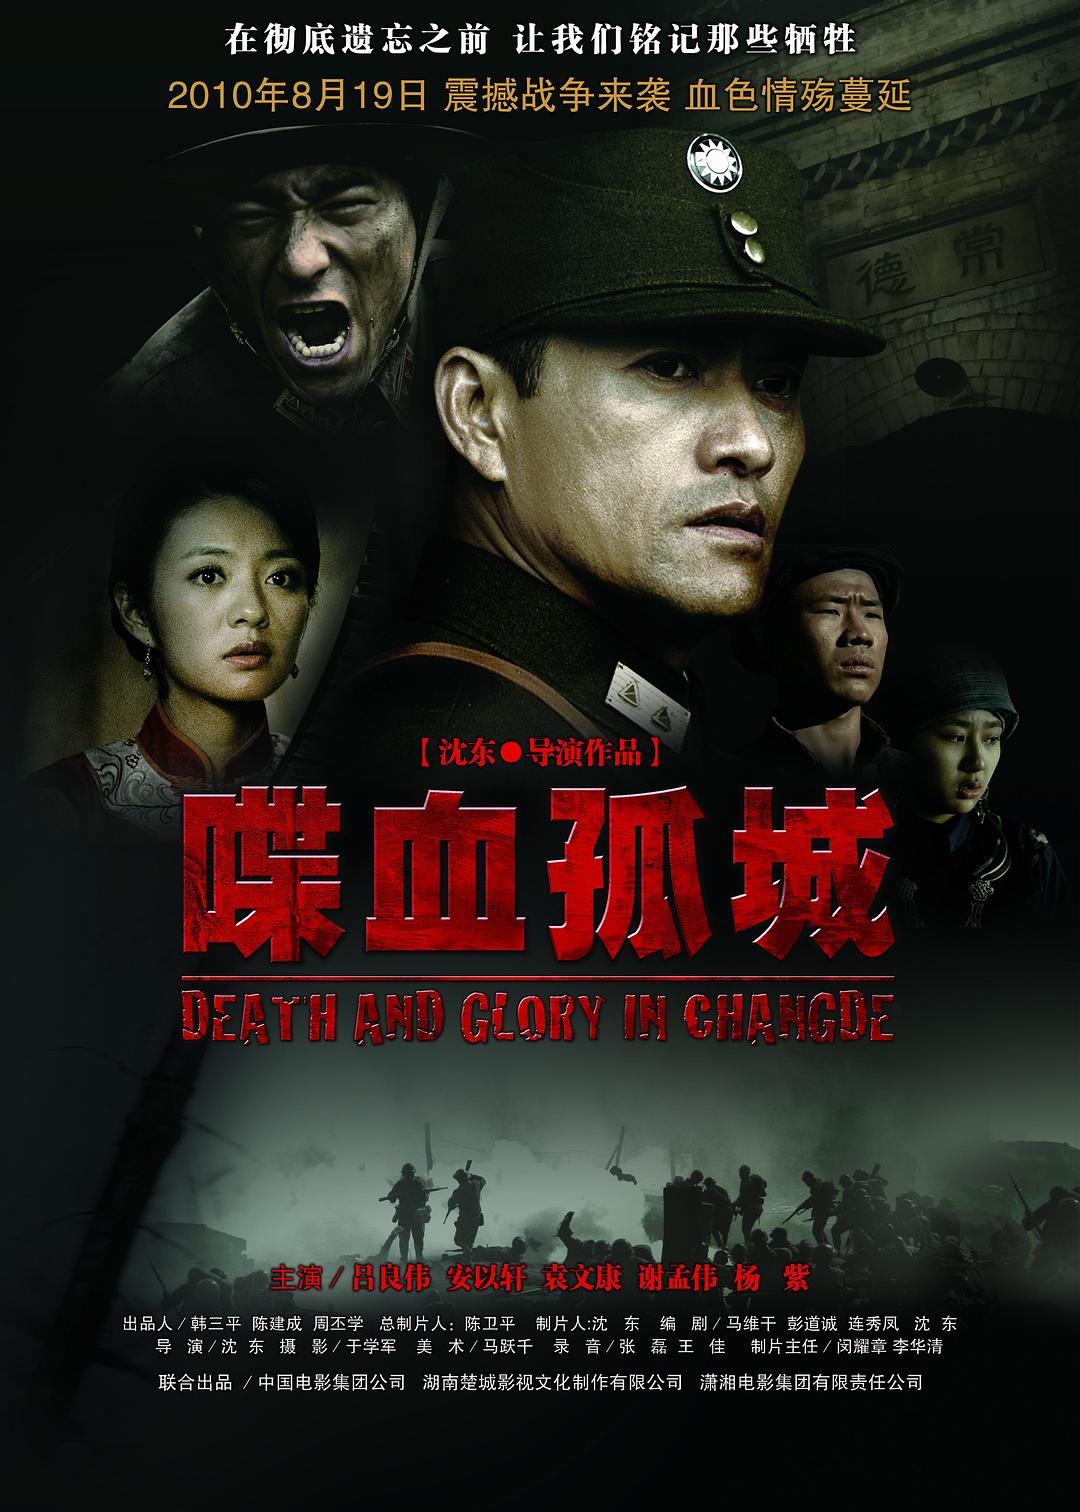 Ѫ³ Death.And.Glory.In.ChangDe.2010.1080p.BluRay.x264-aBD 6.56GB-1.png